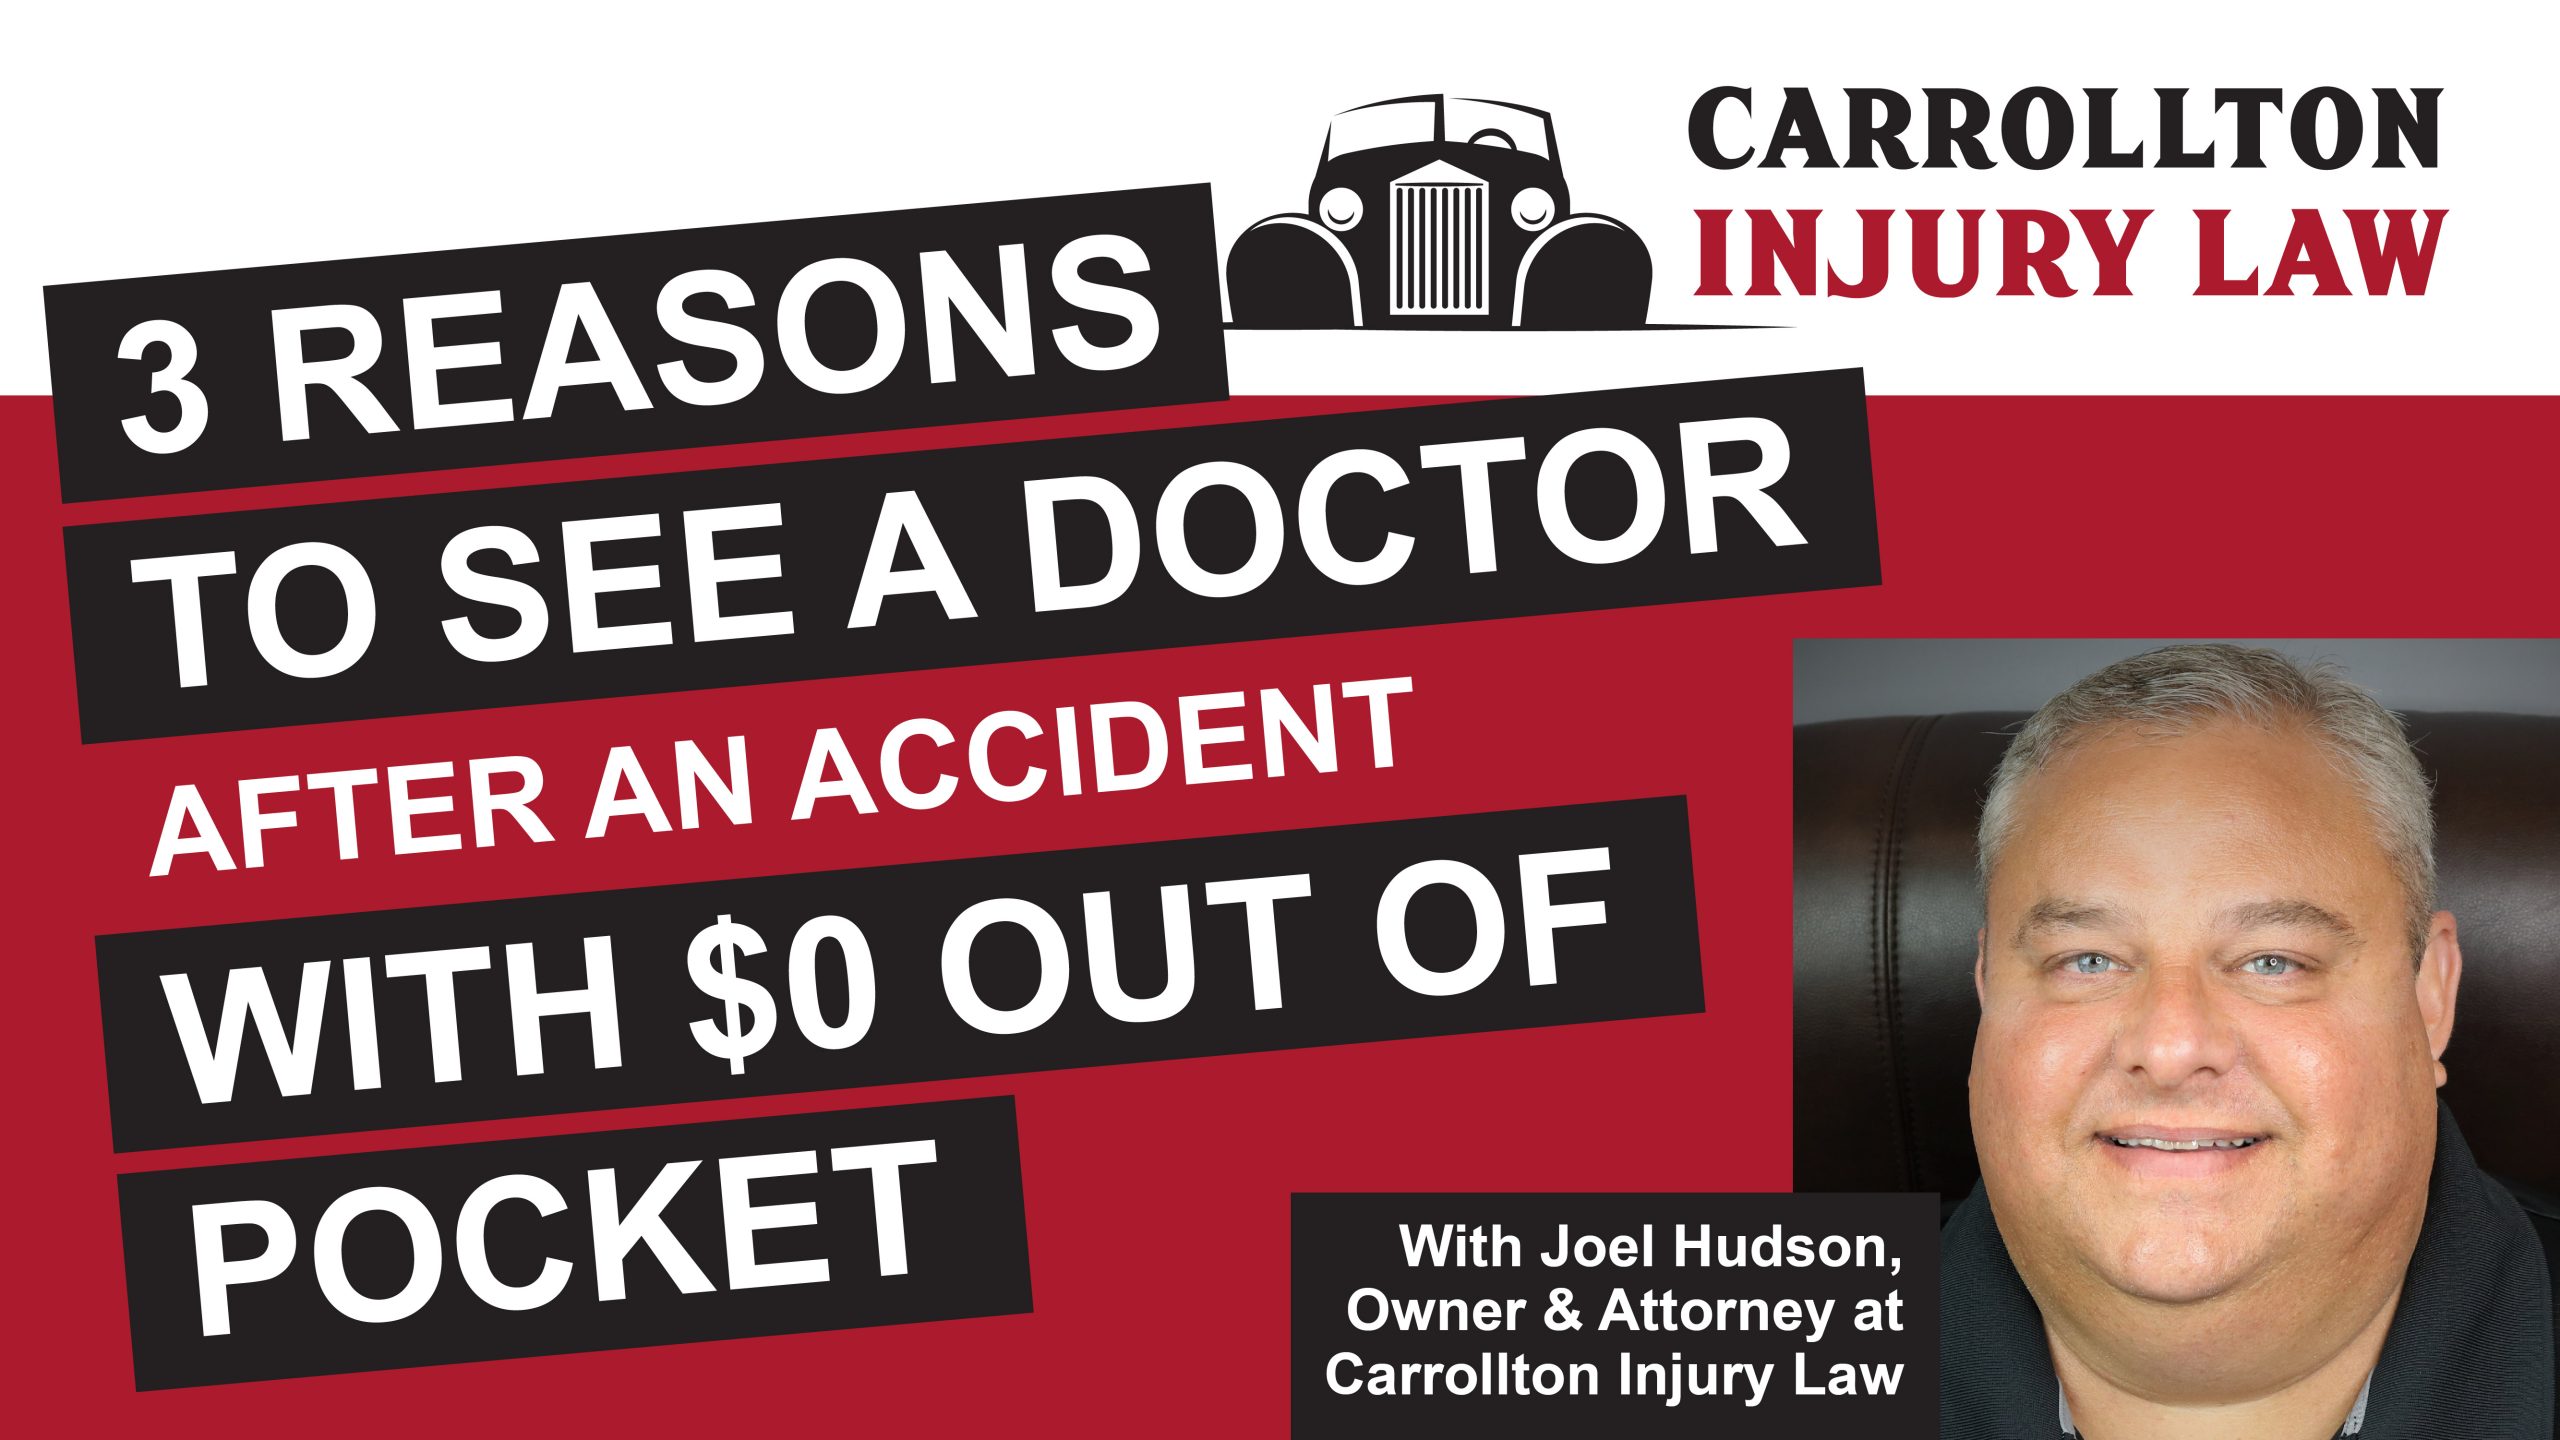 3 reasons to see a doctor after an accident